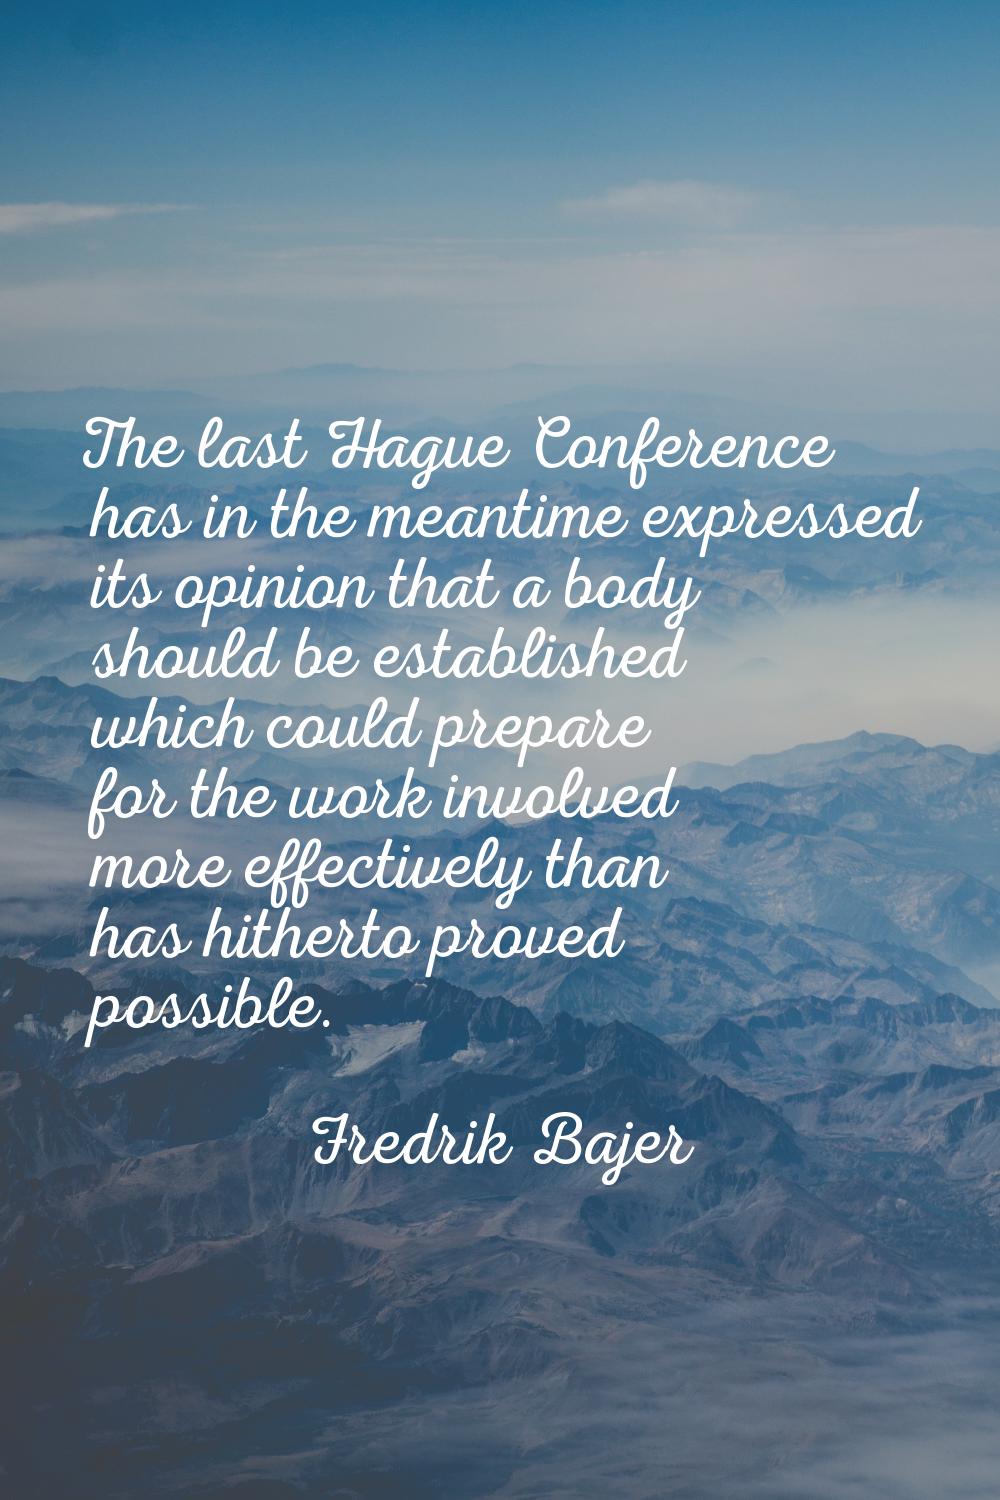 The last Hague Conference has in the meantime expressed its opinion that a body should be establish